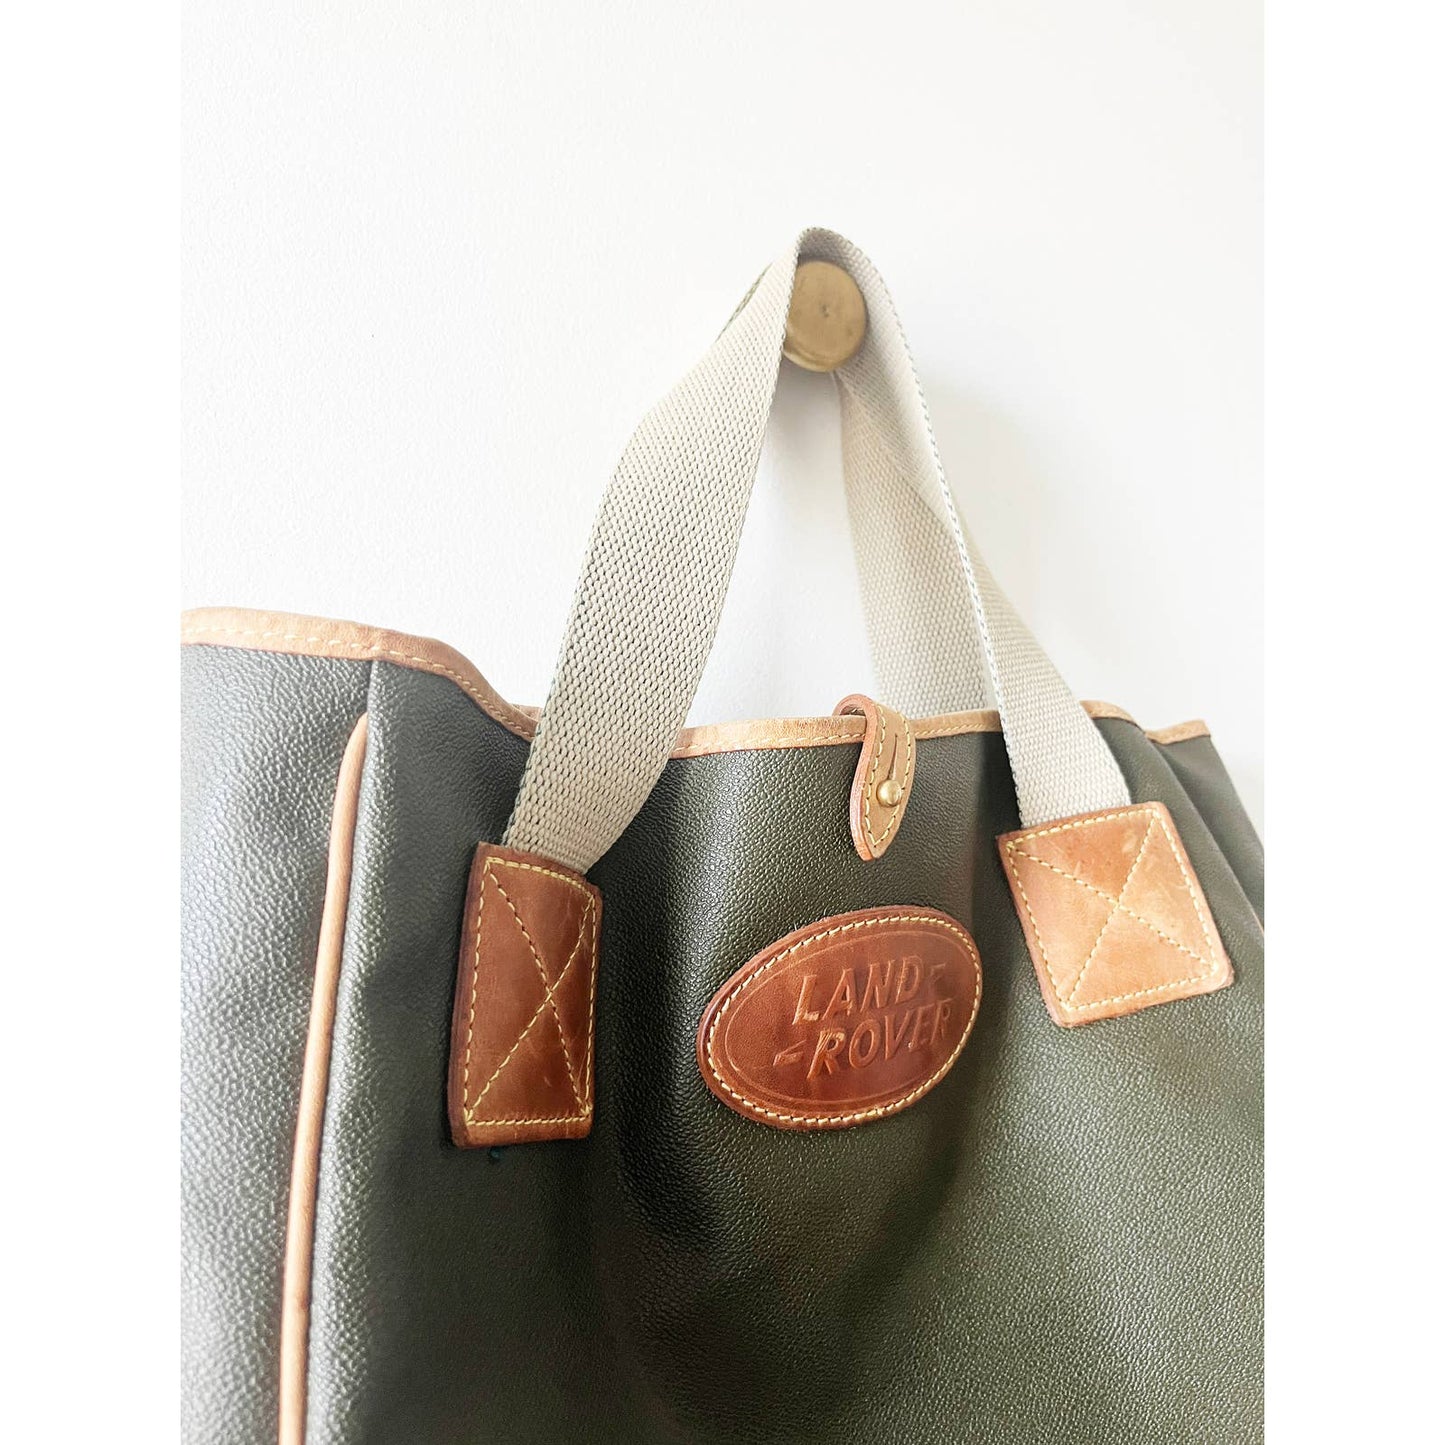 Vintage Land Rover Canvas and Leather Tote Bag